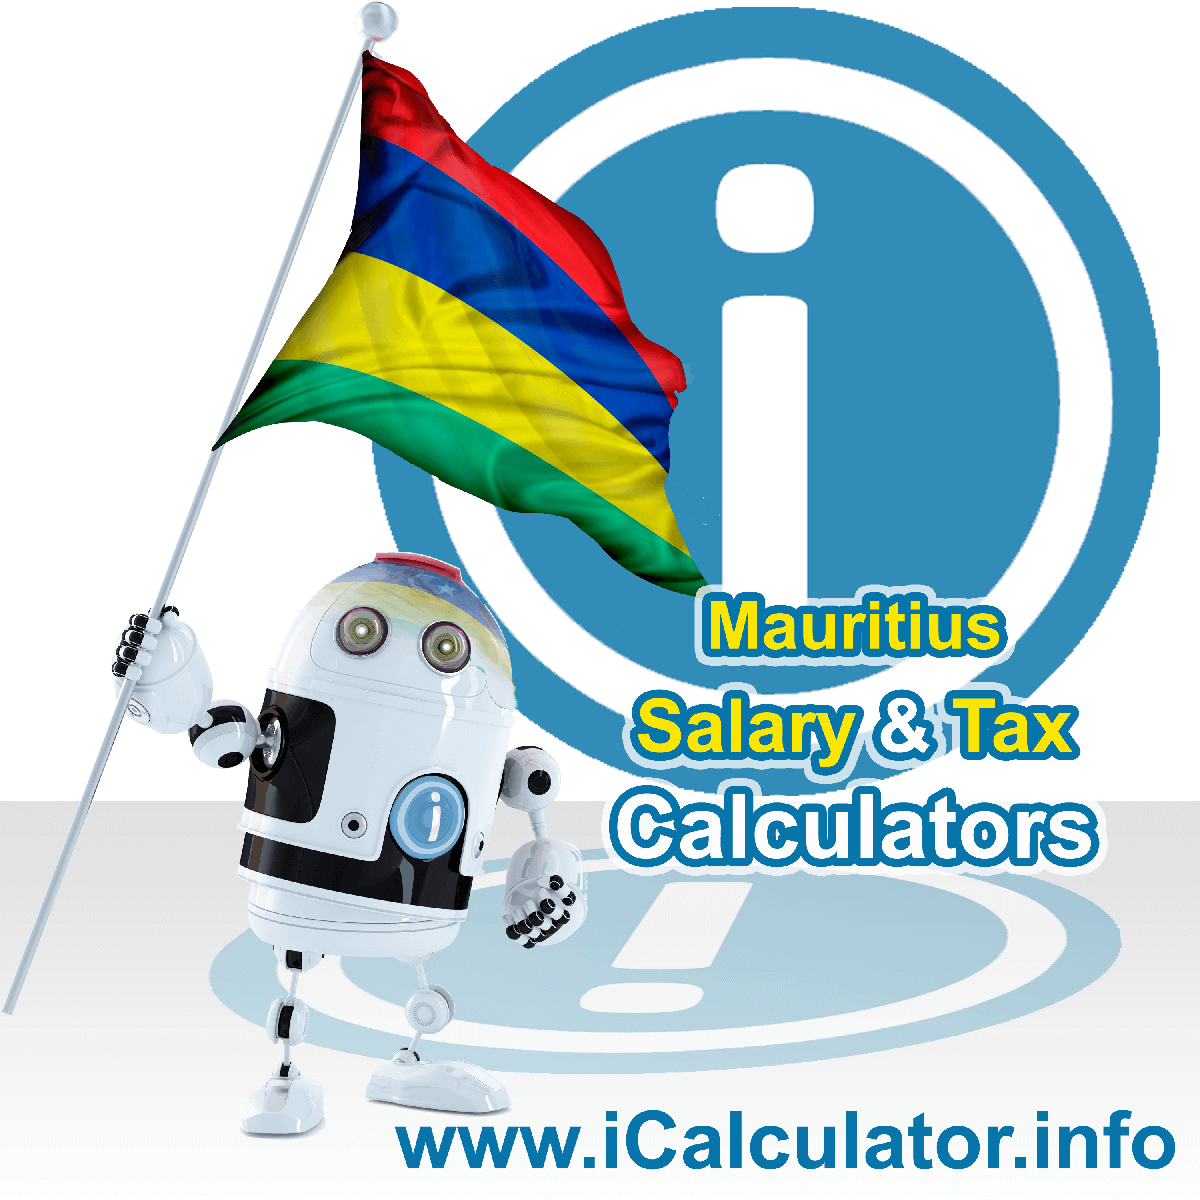 Mauritius Tax Calculator. This image shows the Mauritius flag and information relating to the tax formula for the Mauritius Salary Calculator